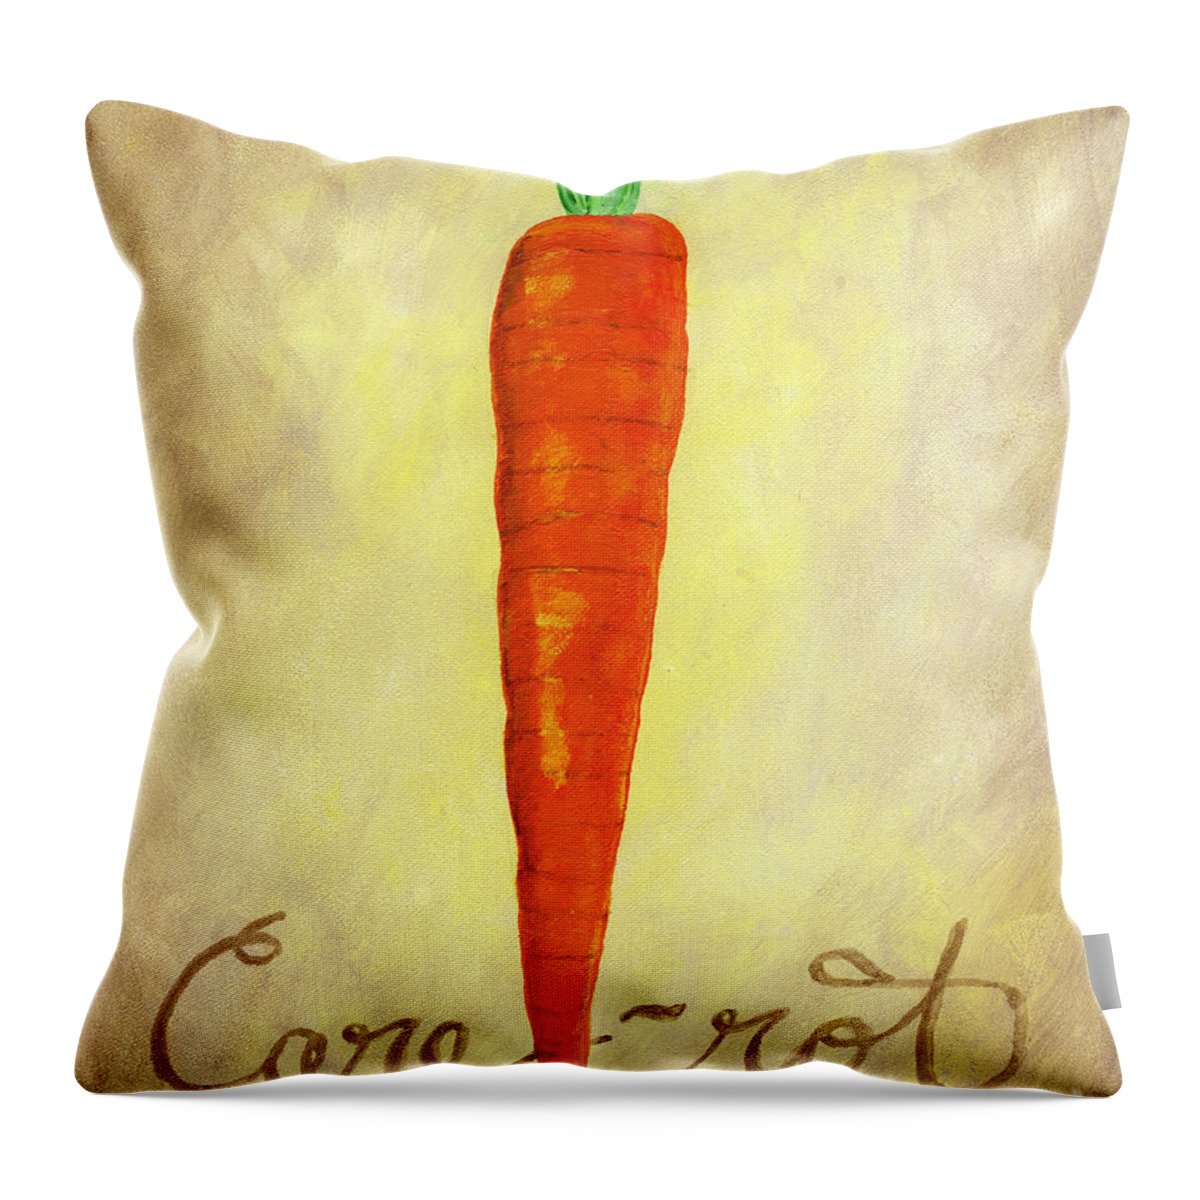 Carrot Throw Pillow featuring the painting Carrot by Michelle Bien